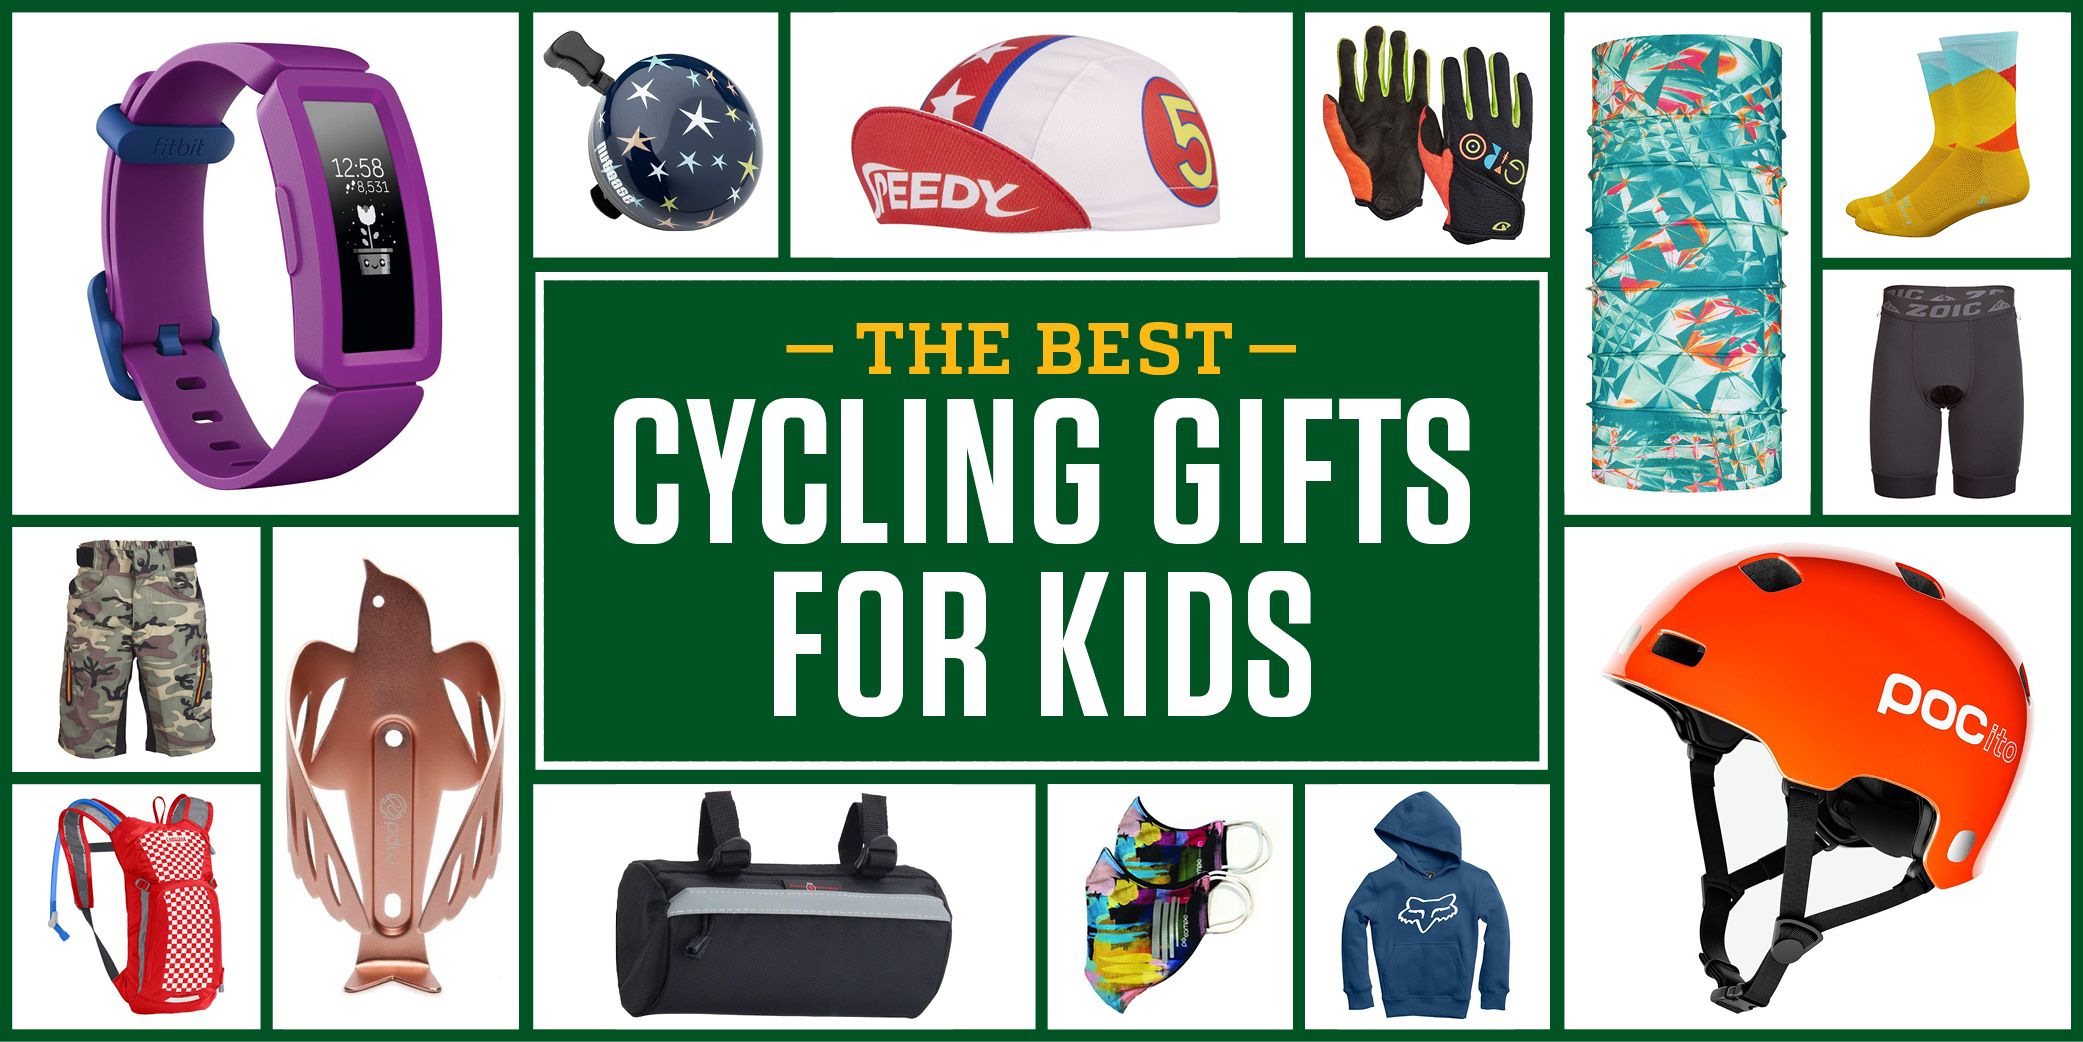 Shop the best bicycles, E-bikes and scooters to gift for the holidays